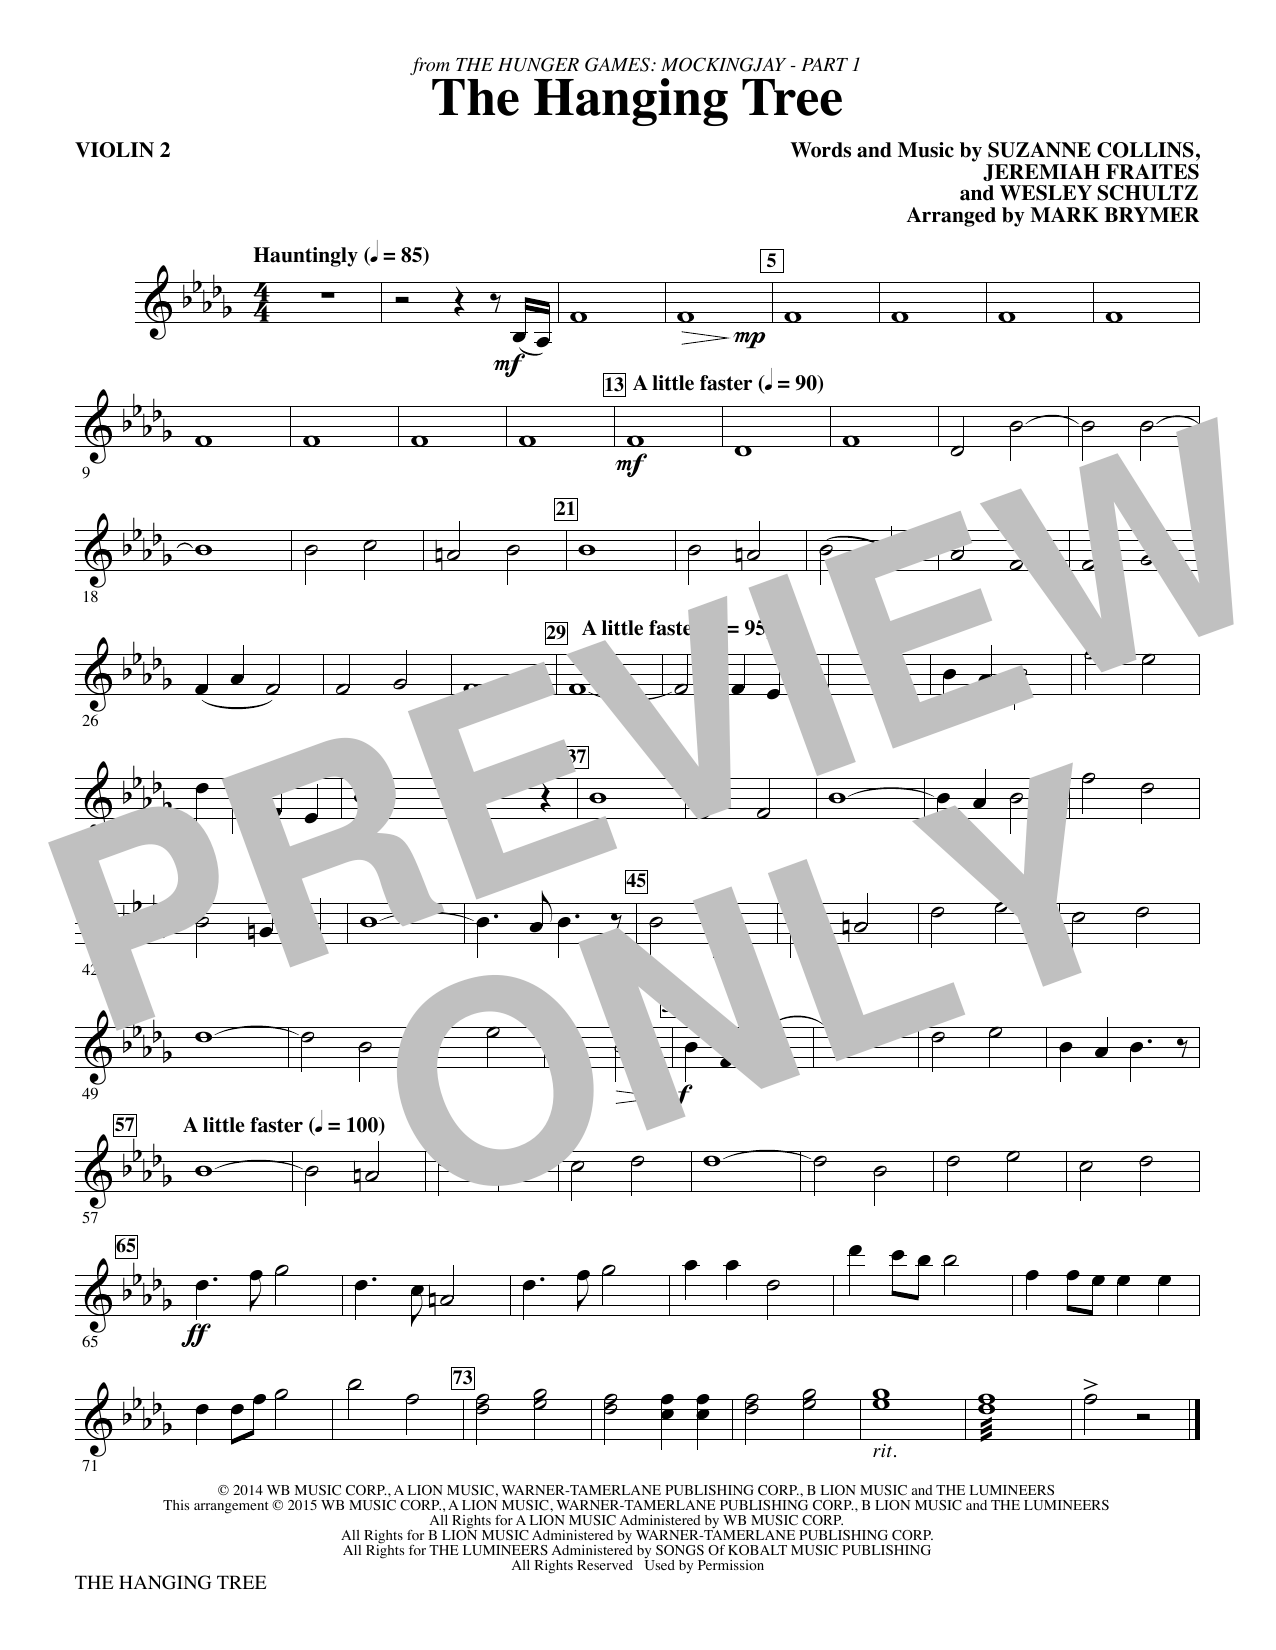 Mark Brymer The Hanging Tree (from The Hunger Games: Mockingjay Part I) - Violin 2 sheet music notes and chords. Download Printable PDF.